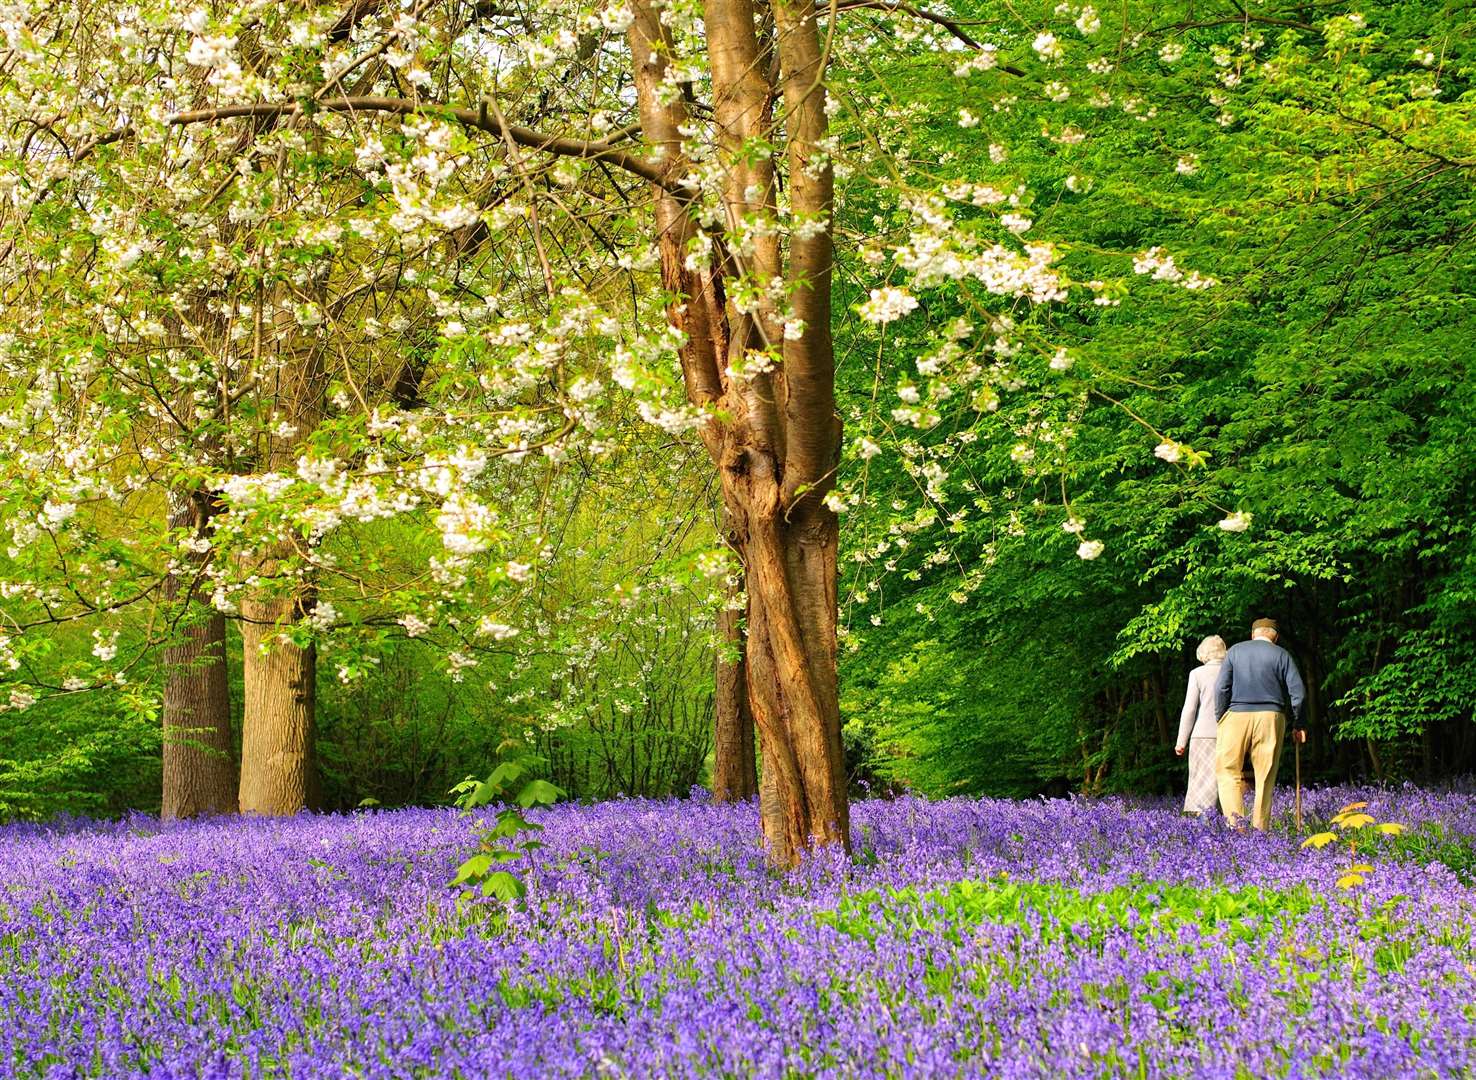 The Bluebell Spectacular returns to Hole Park and Gardens